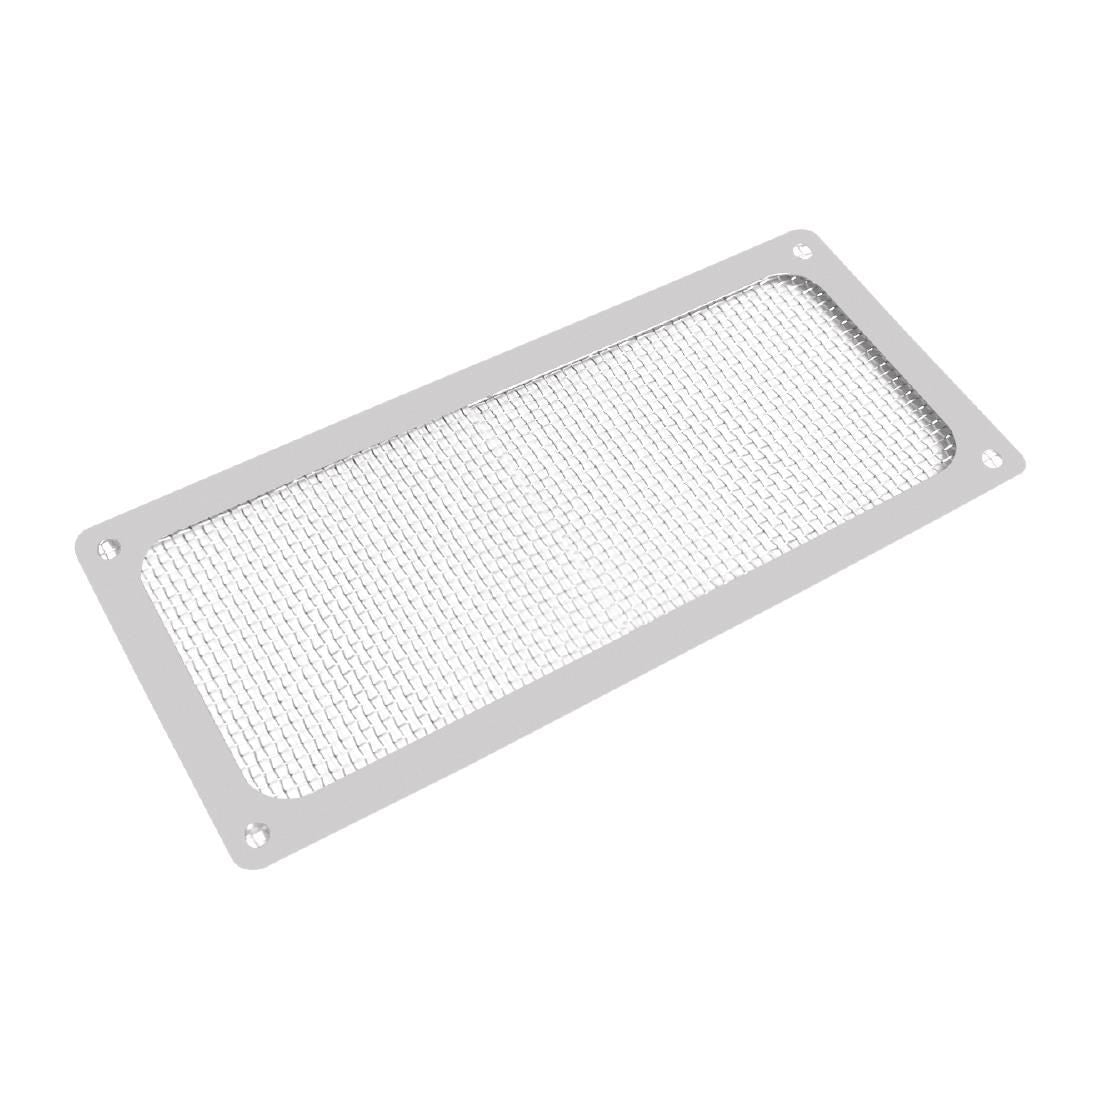 AJ112 Buffalo Lamp Cover Fits CW146 JD Catering Equipment Solutions Ltd